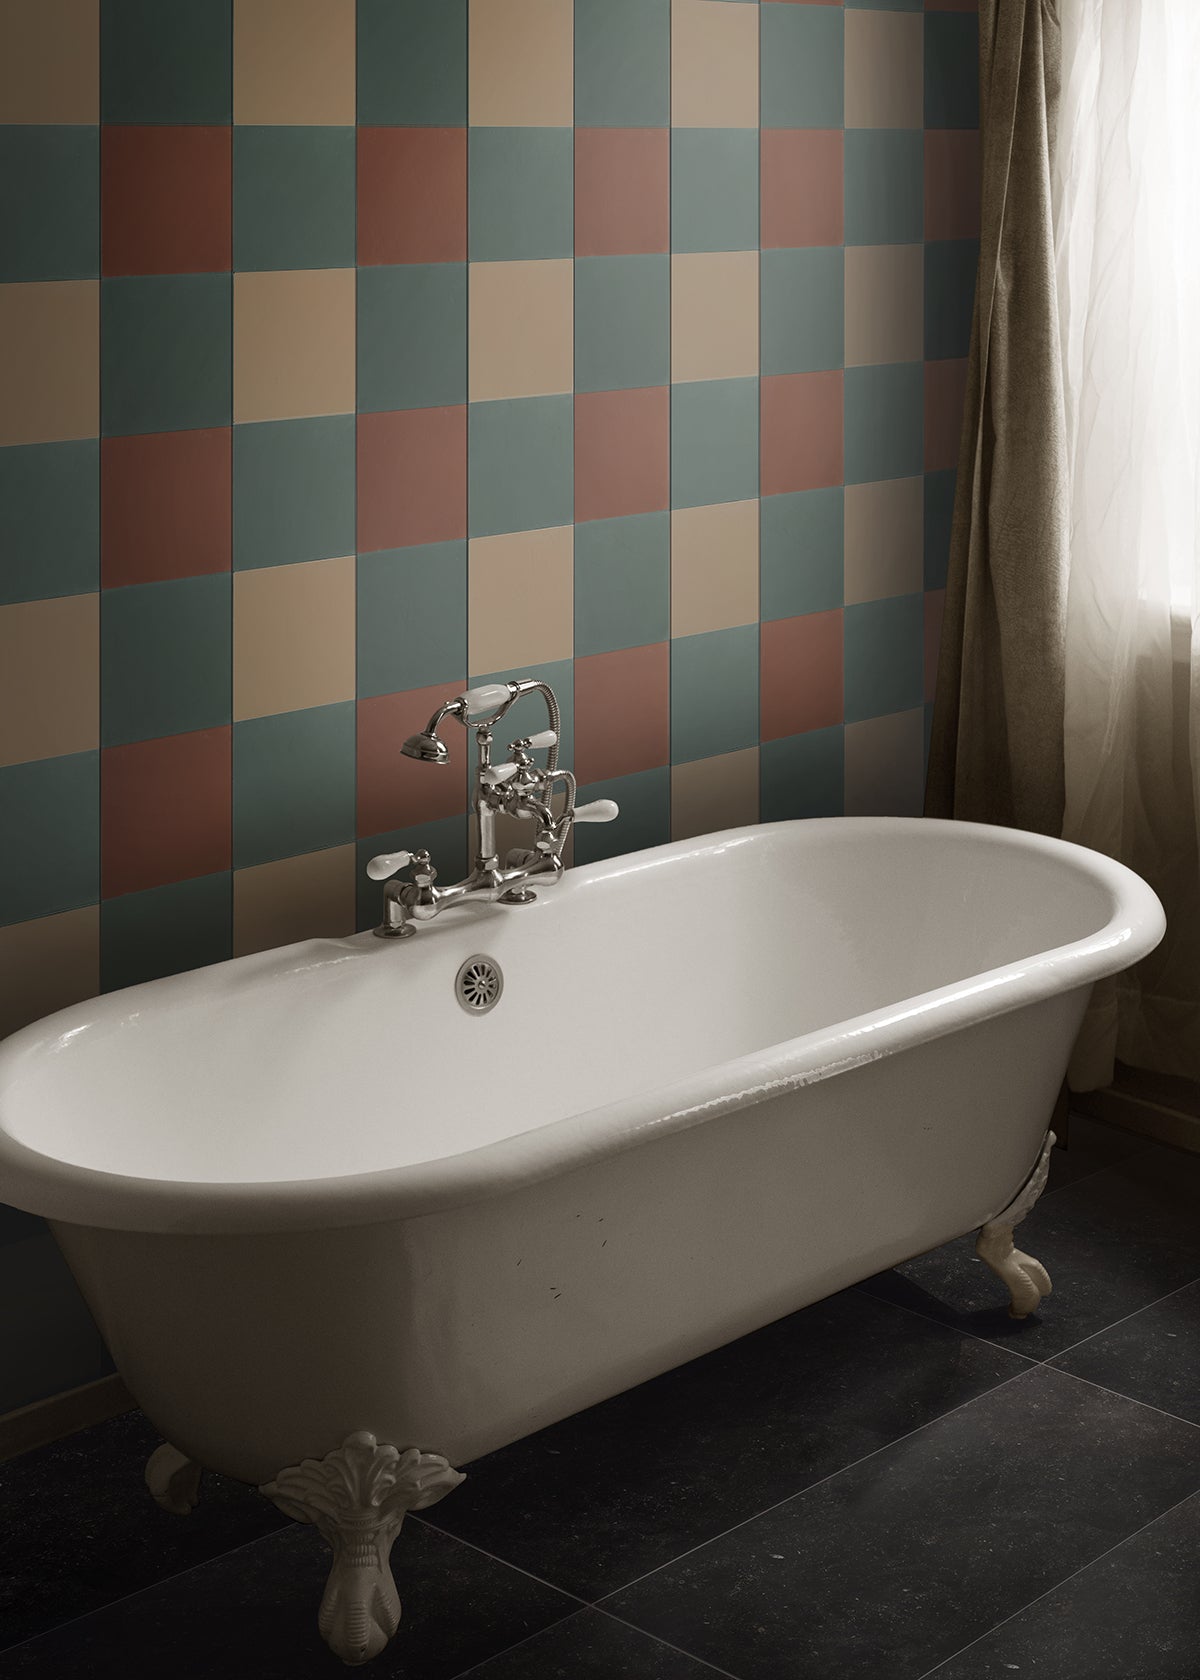 A standalone bathtub in front of large square cement tiles on a wall in a plaid-like pattern.